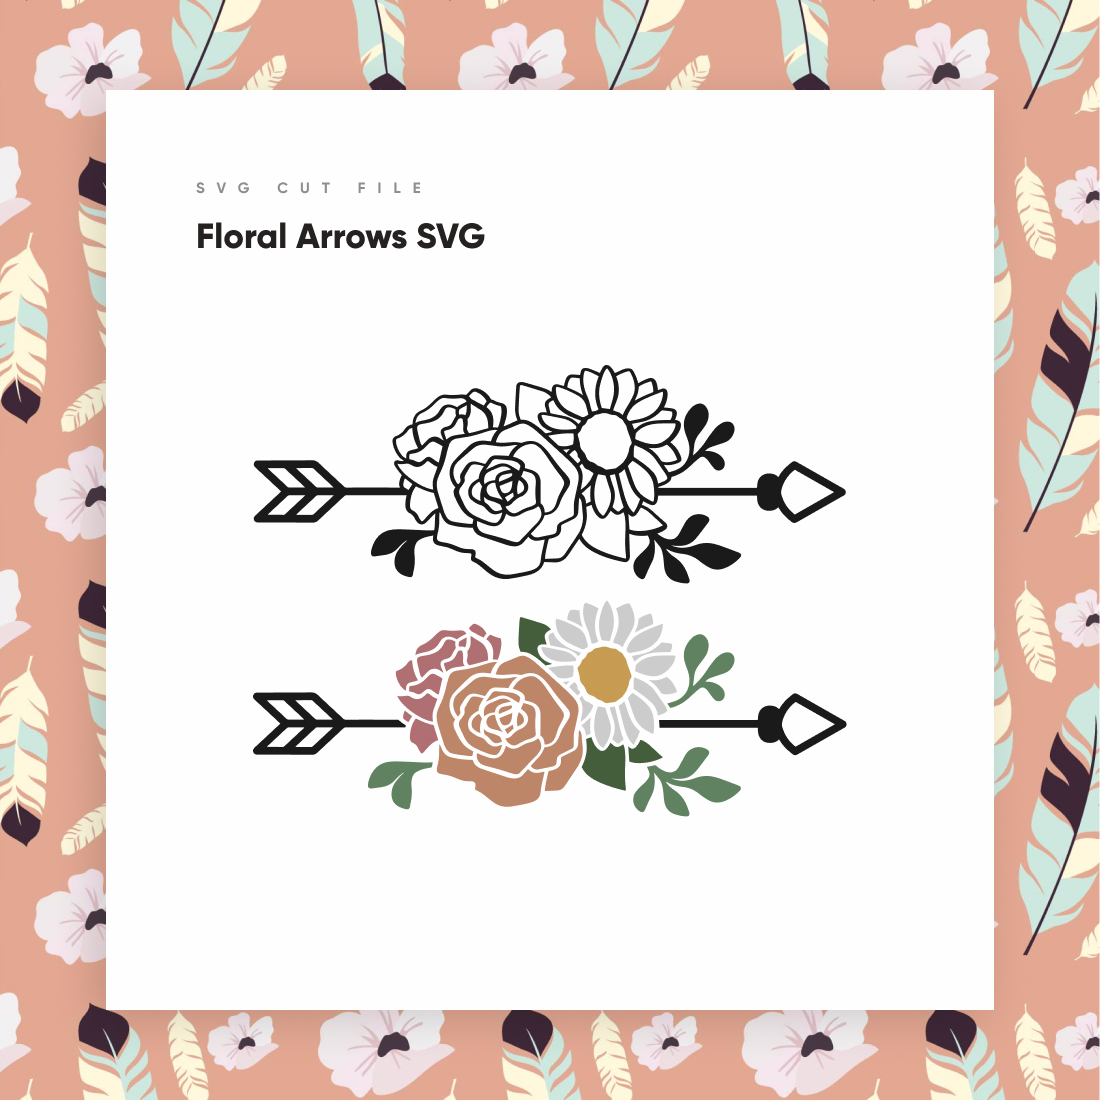 Free Floral Arrow SVG cover image.